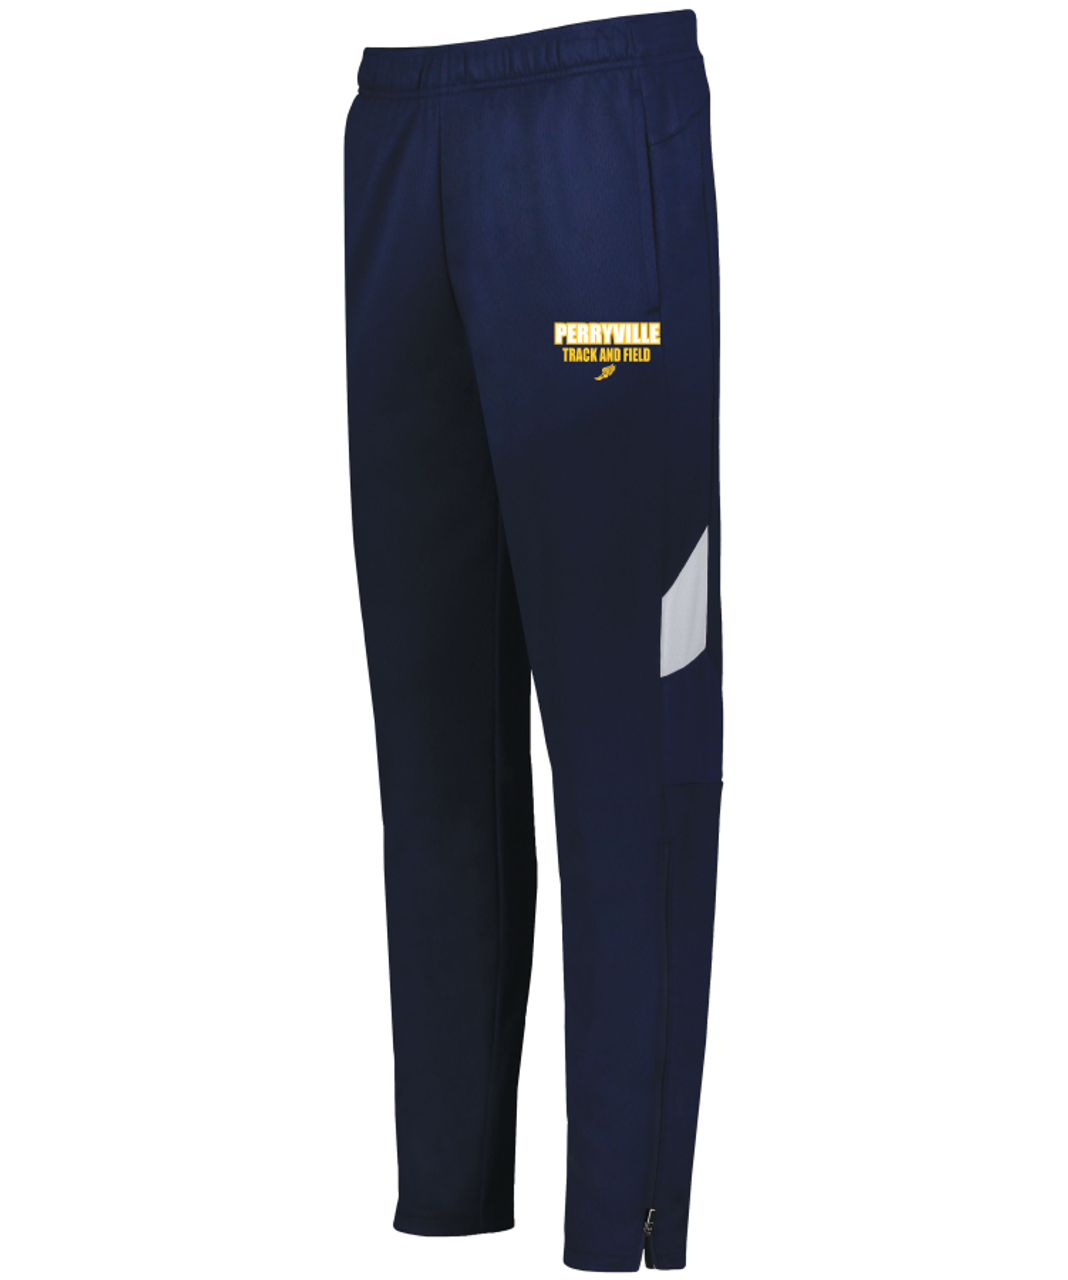 Perryville MS Track & Field Warm Up Pant